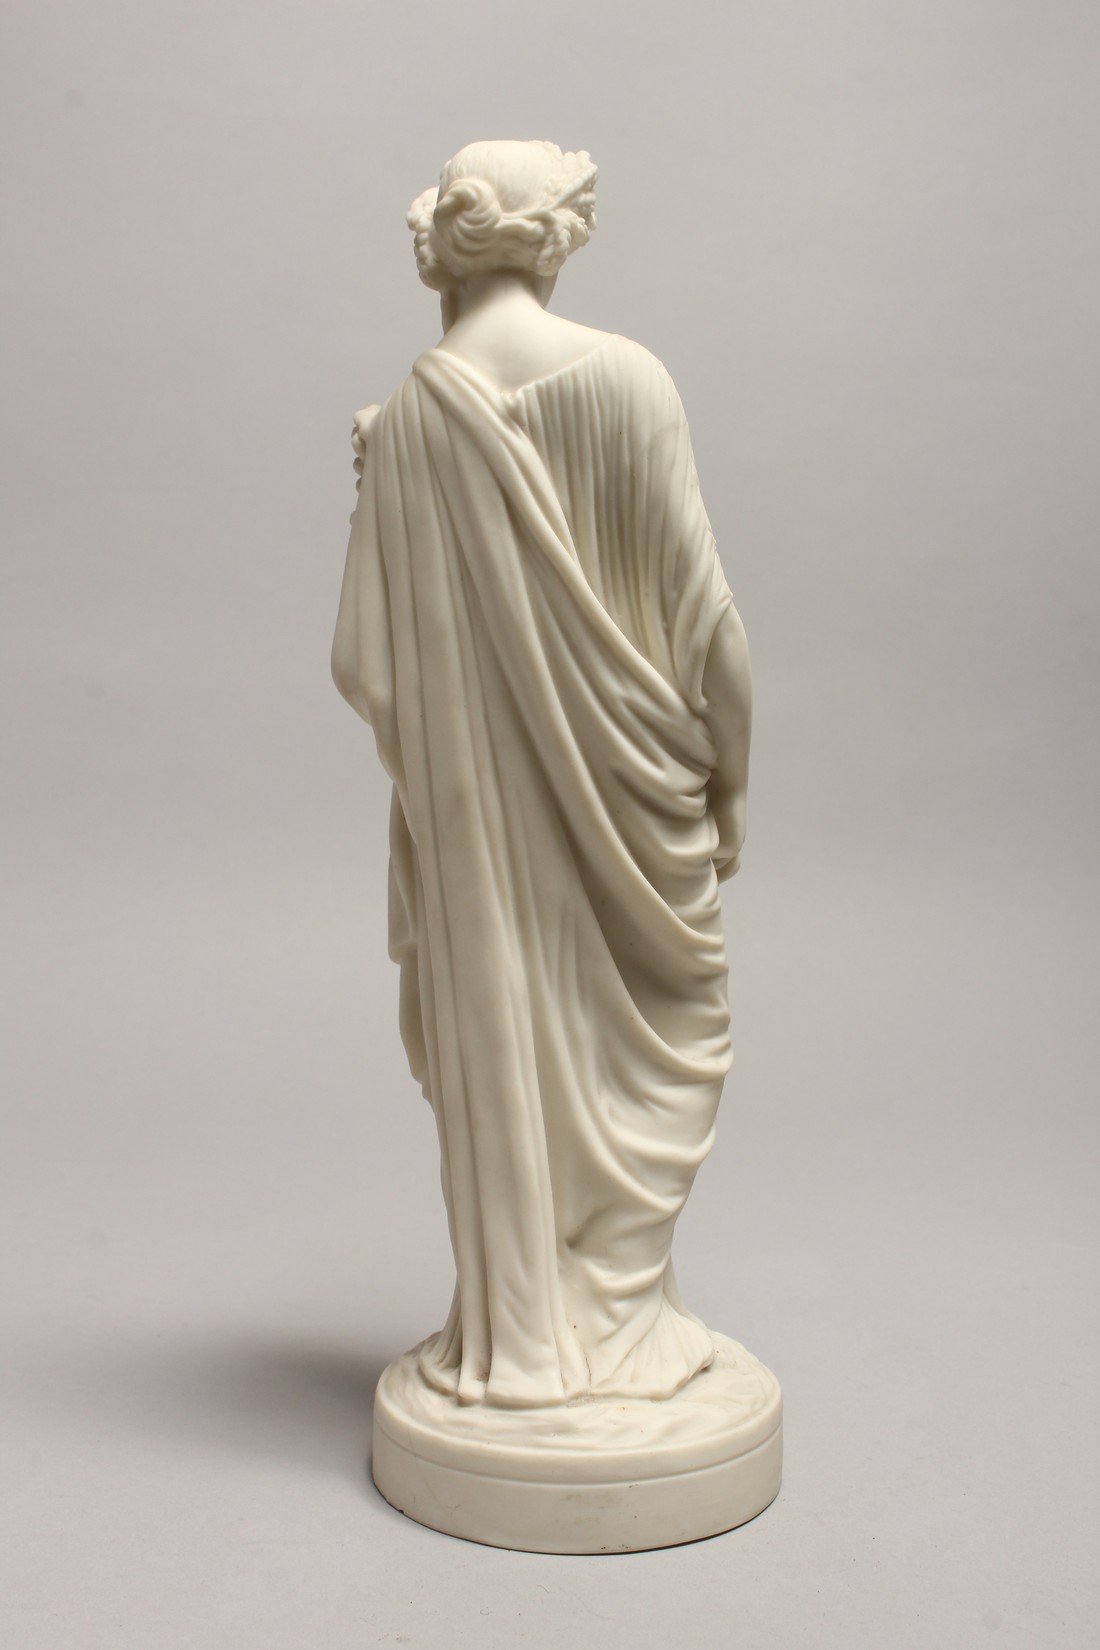 A 19TH CENTURY PARIAN FIGURE DEPICTING HARVEST 23ins high - Image 4 of 6